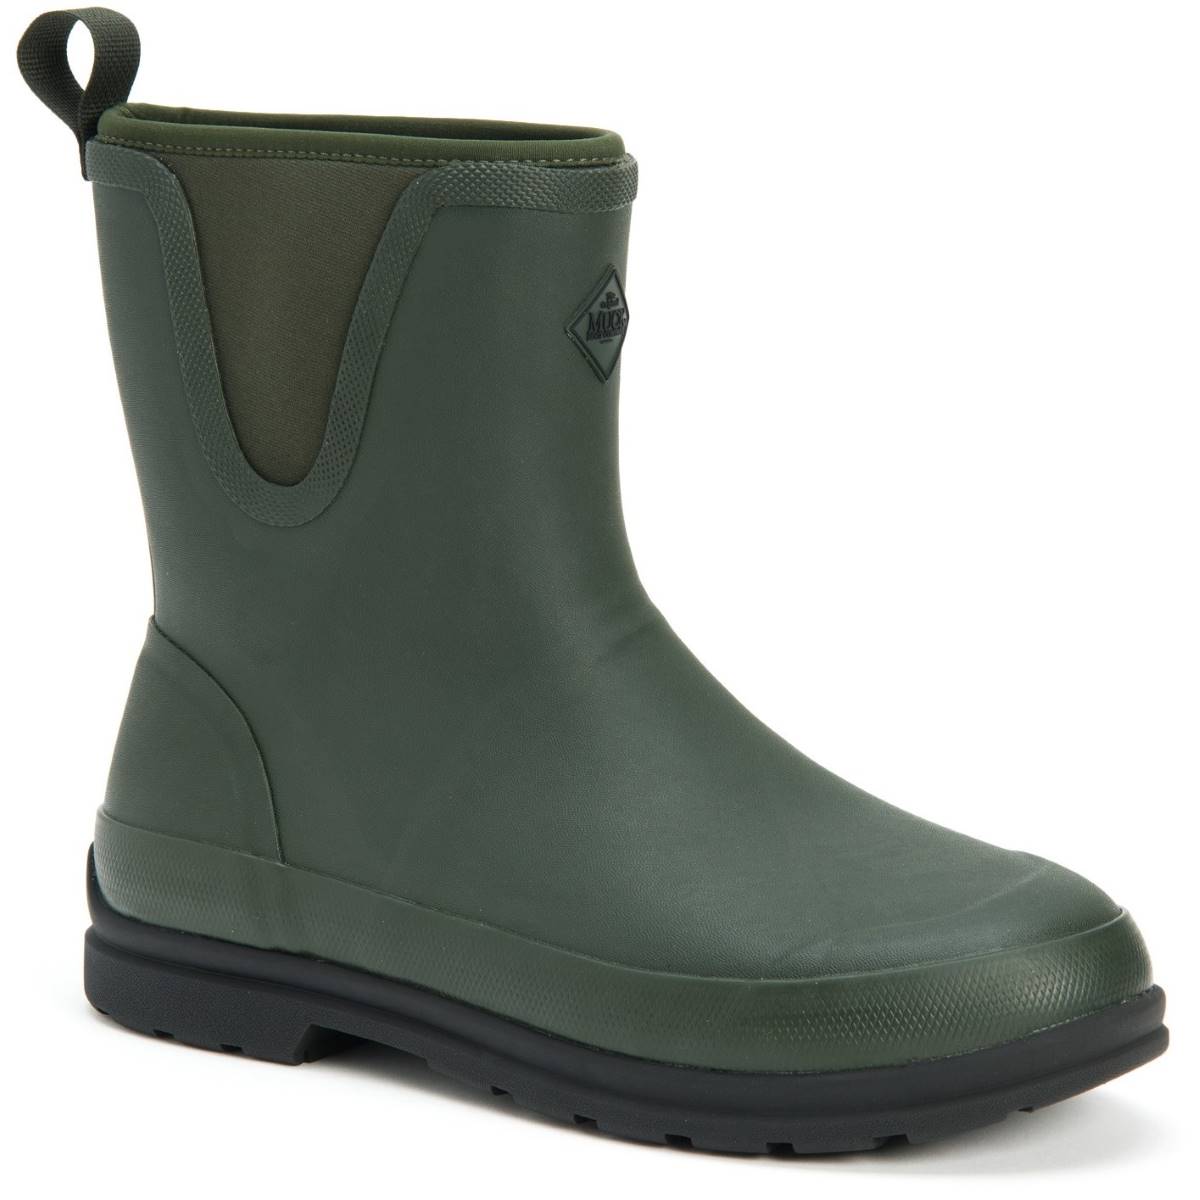 Muck Boots Originals Pull On Mid Green Mens boots OMM-300 in a Plain Rubber in Size 12